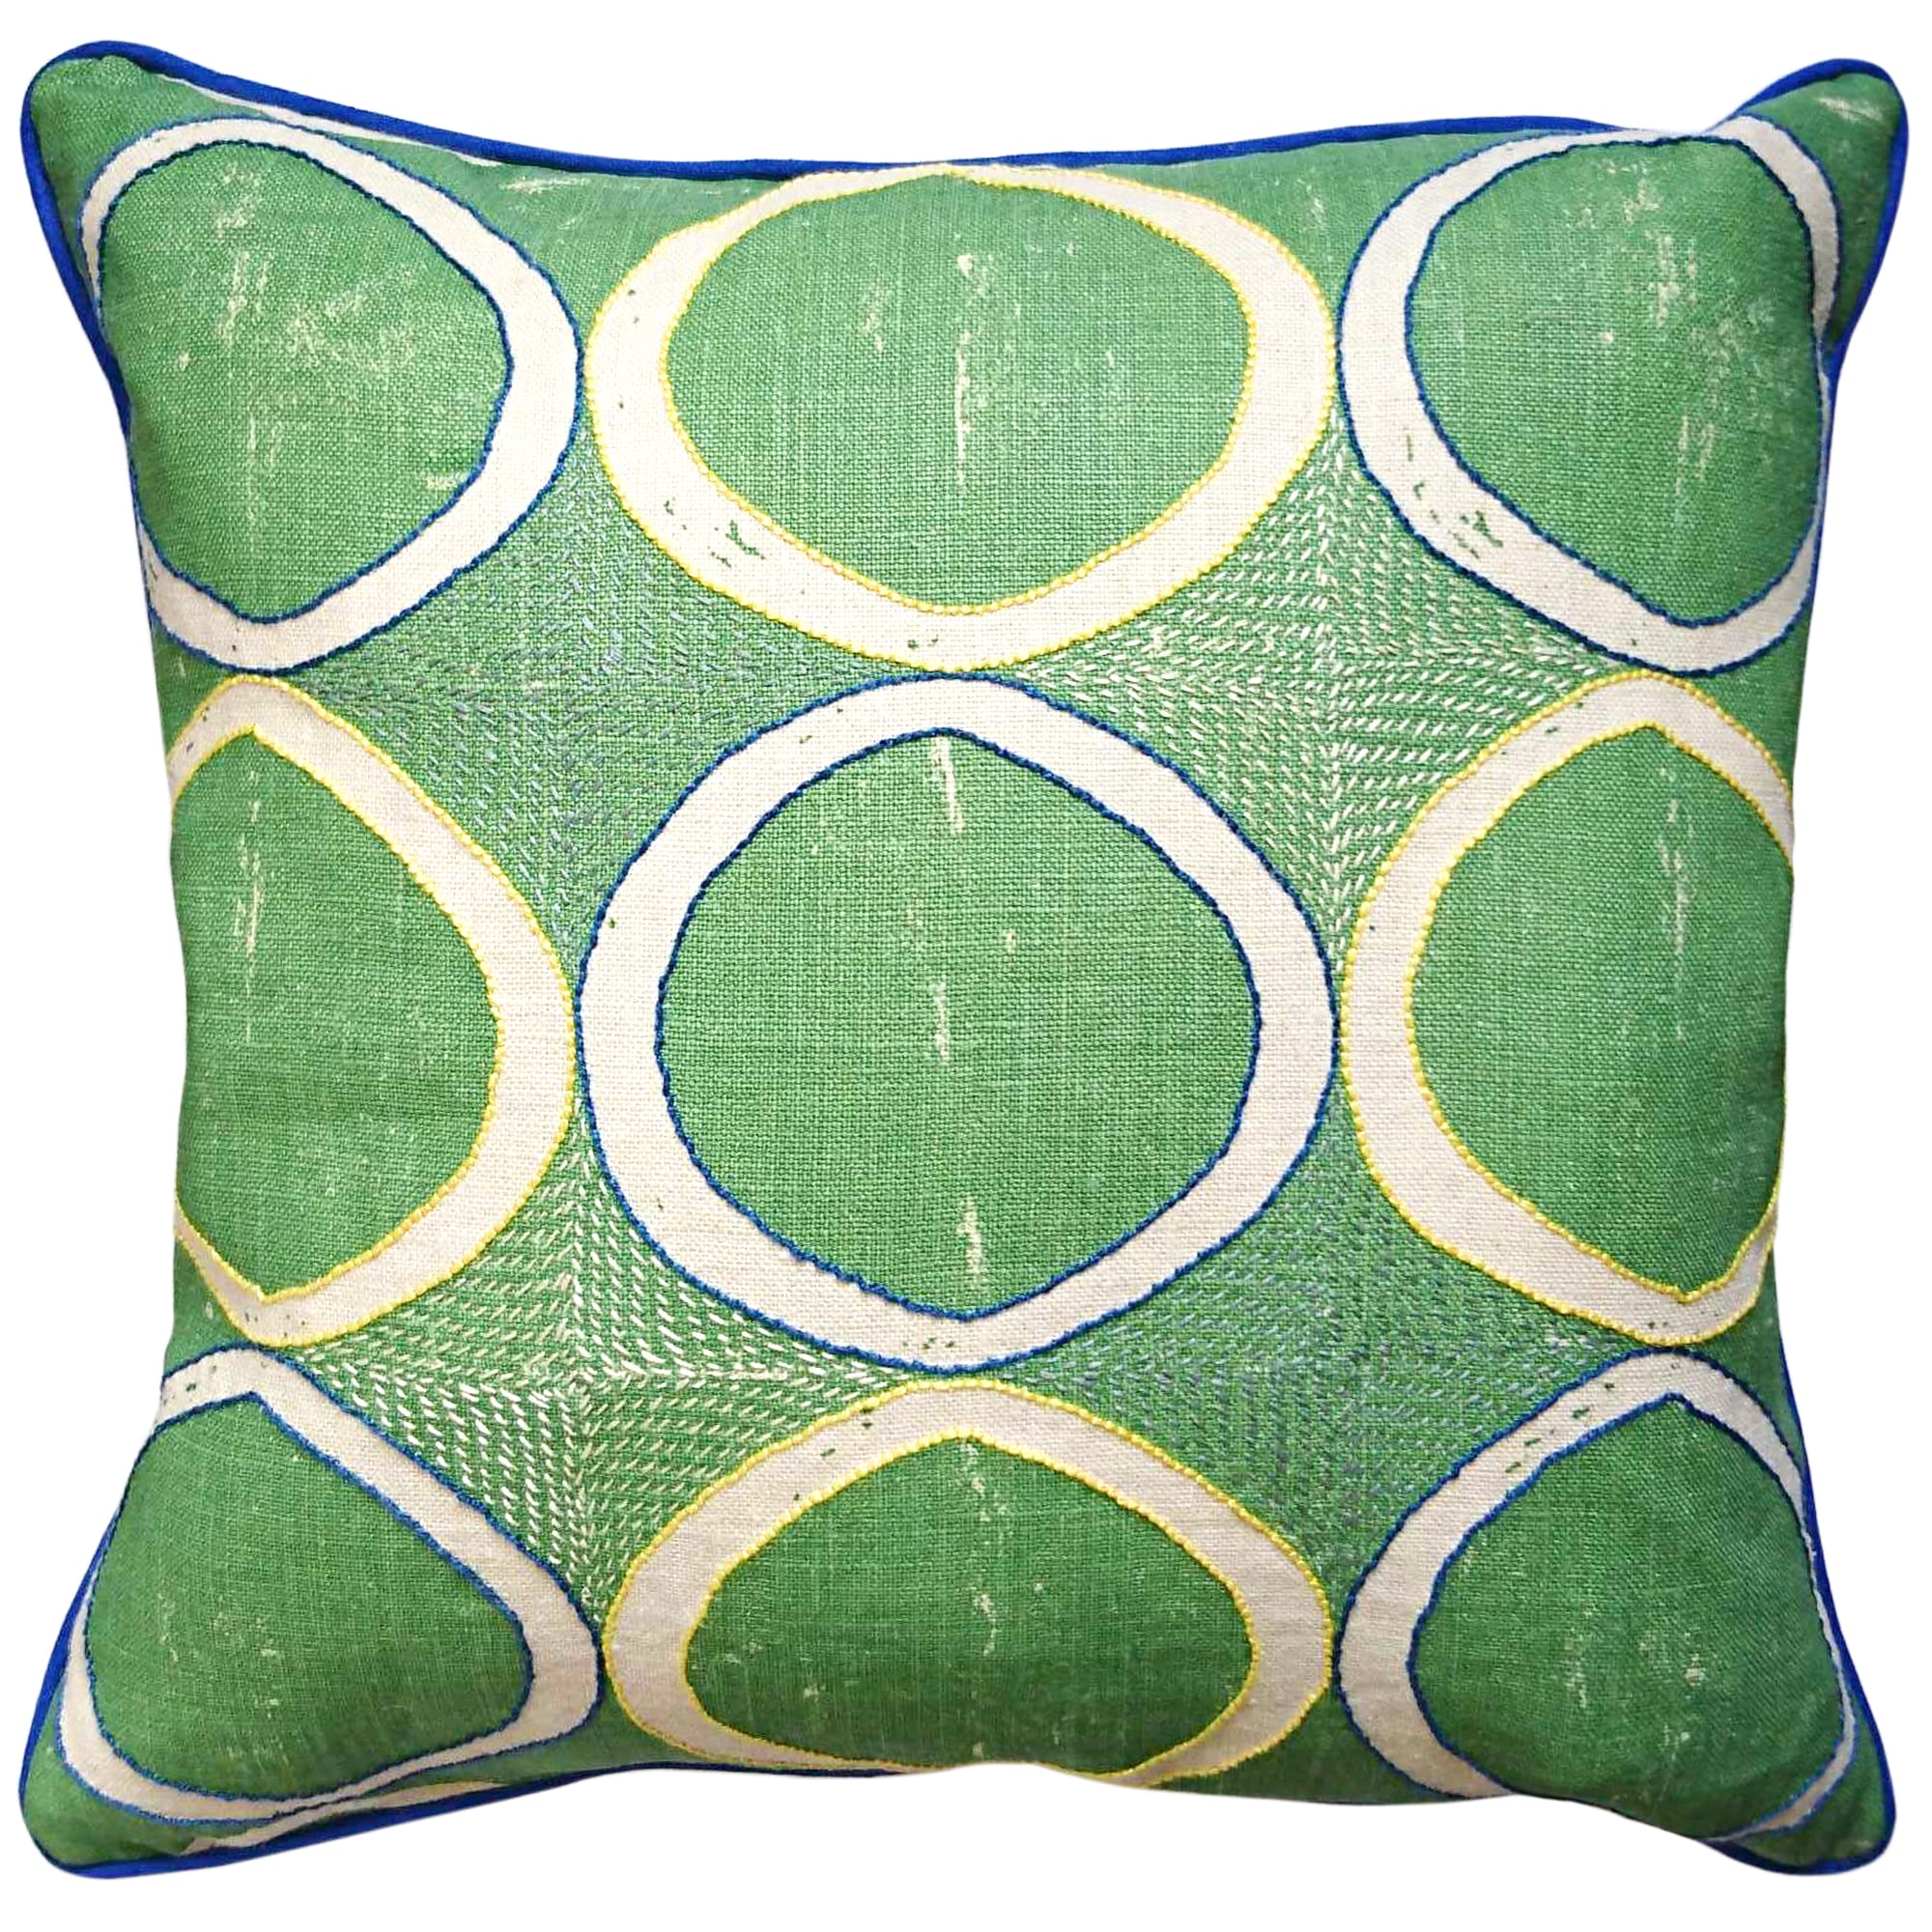 Fine Cell Work Hand-Embroidered Blithfield Kit Kemp Peggy Angus Circles Linen Cushion Green Handmade in Prison